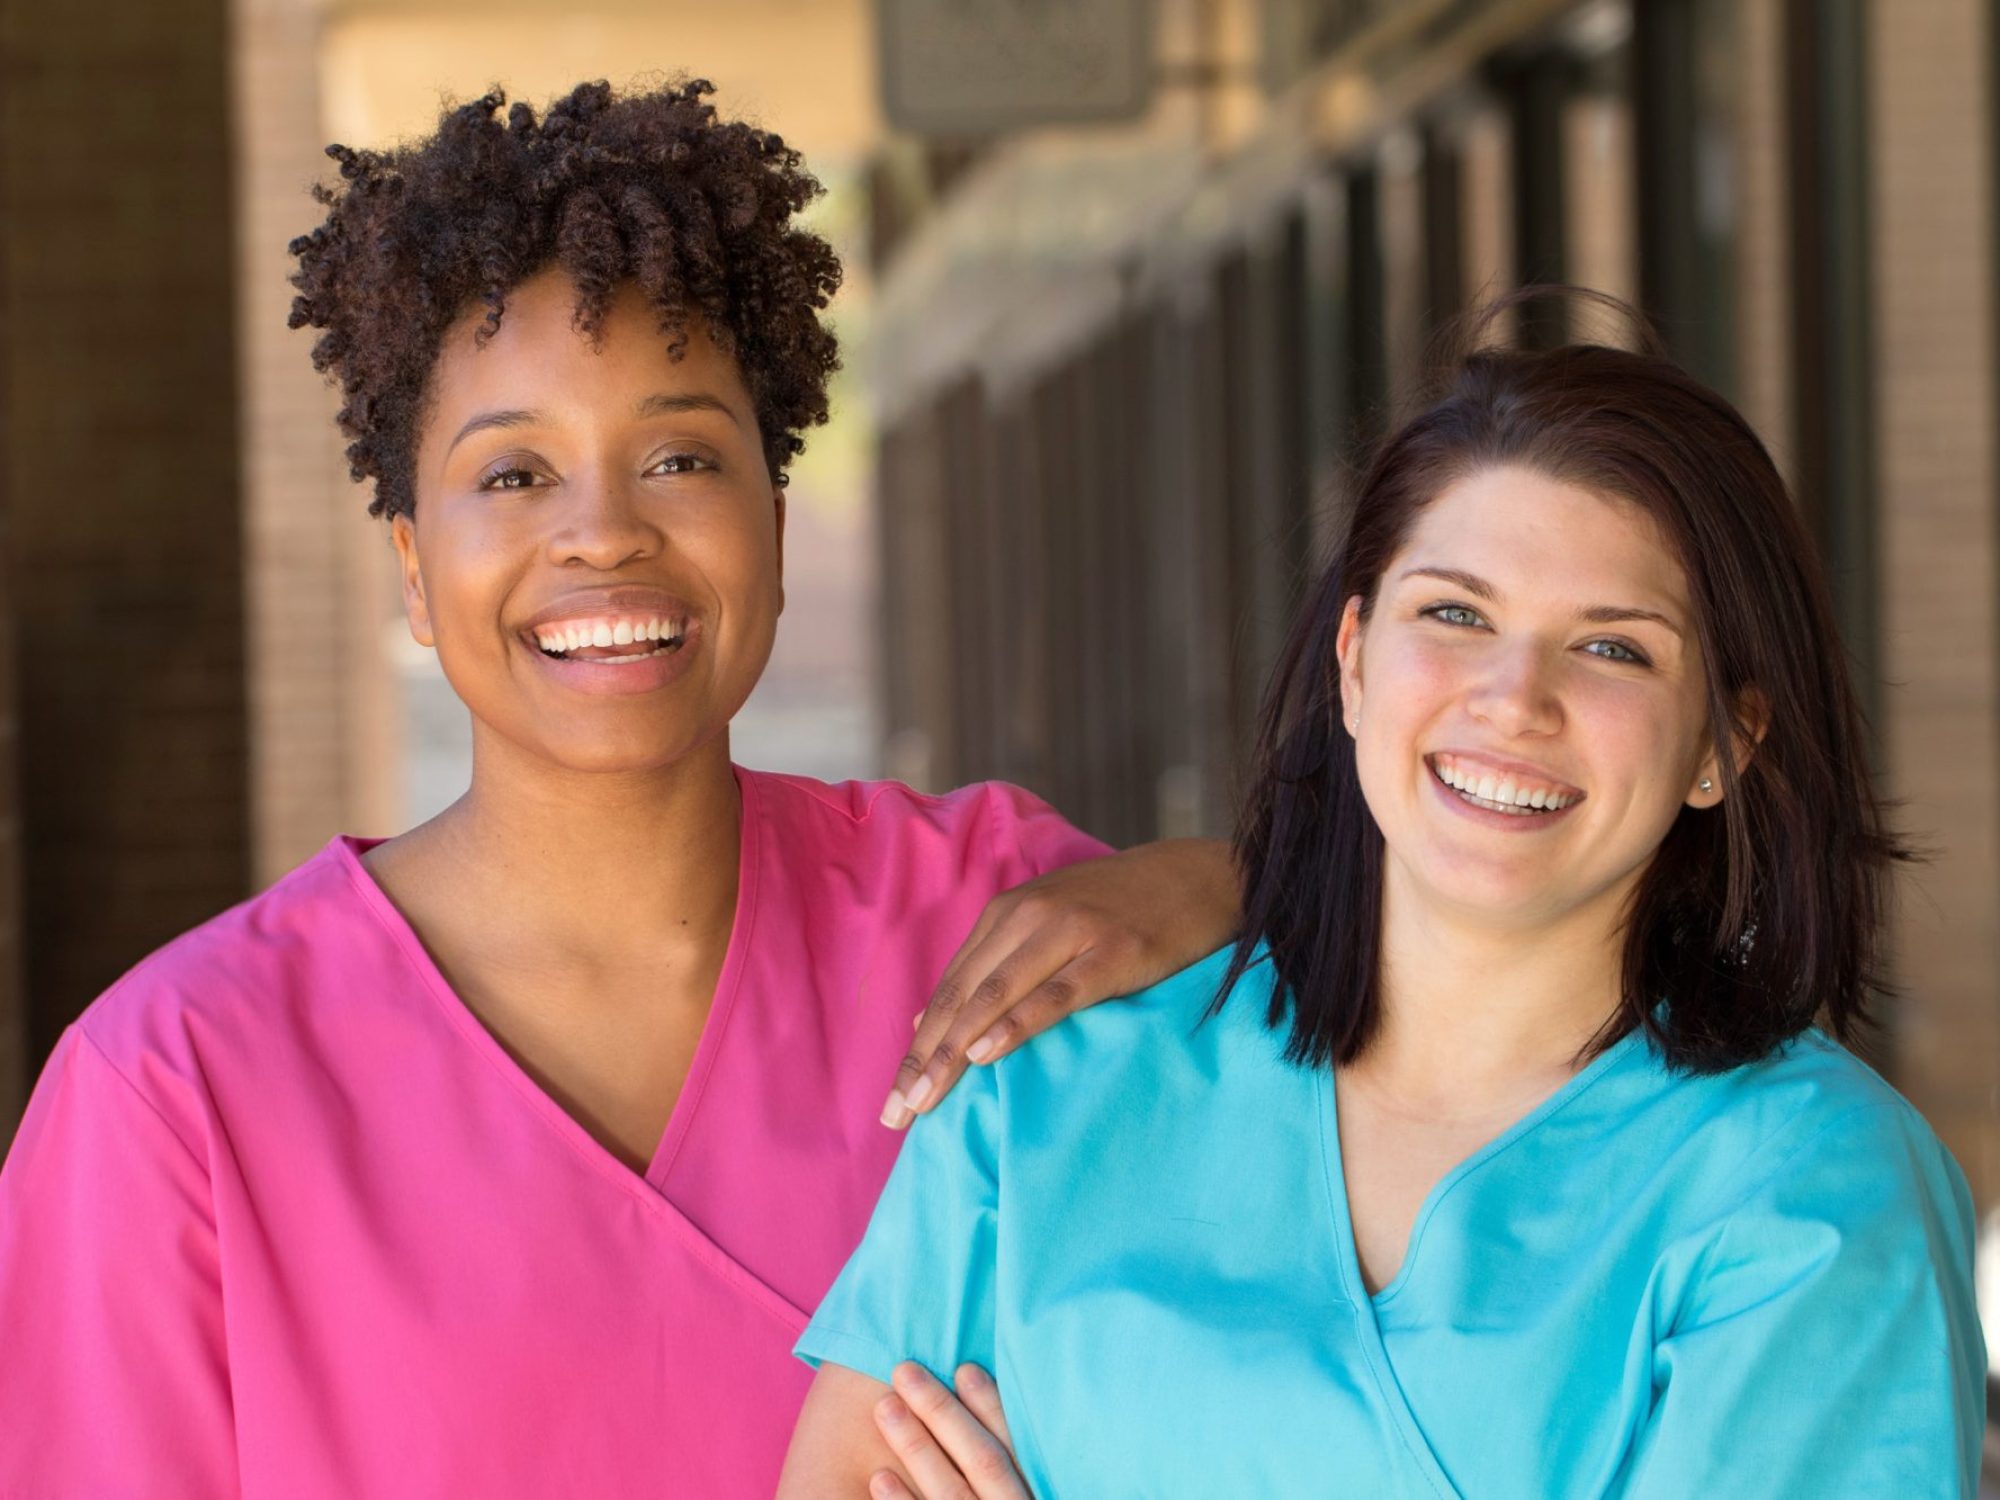 Two female nurses smiling for the camera